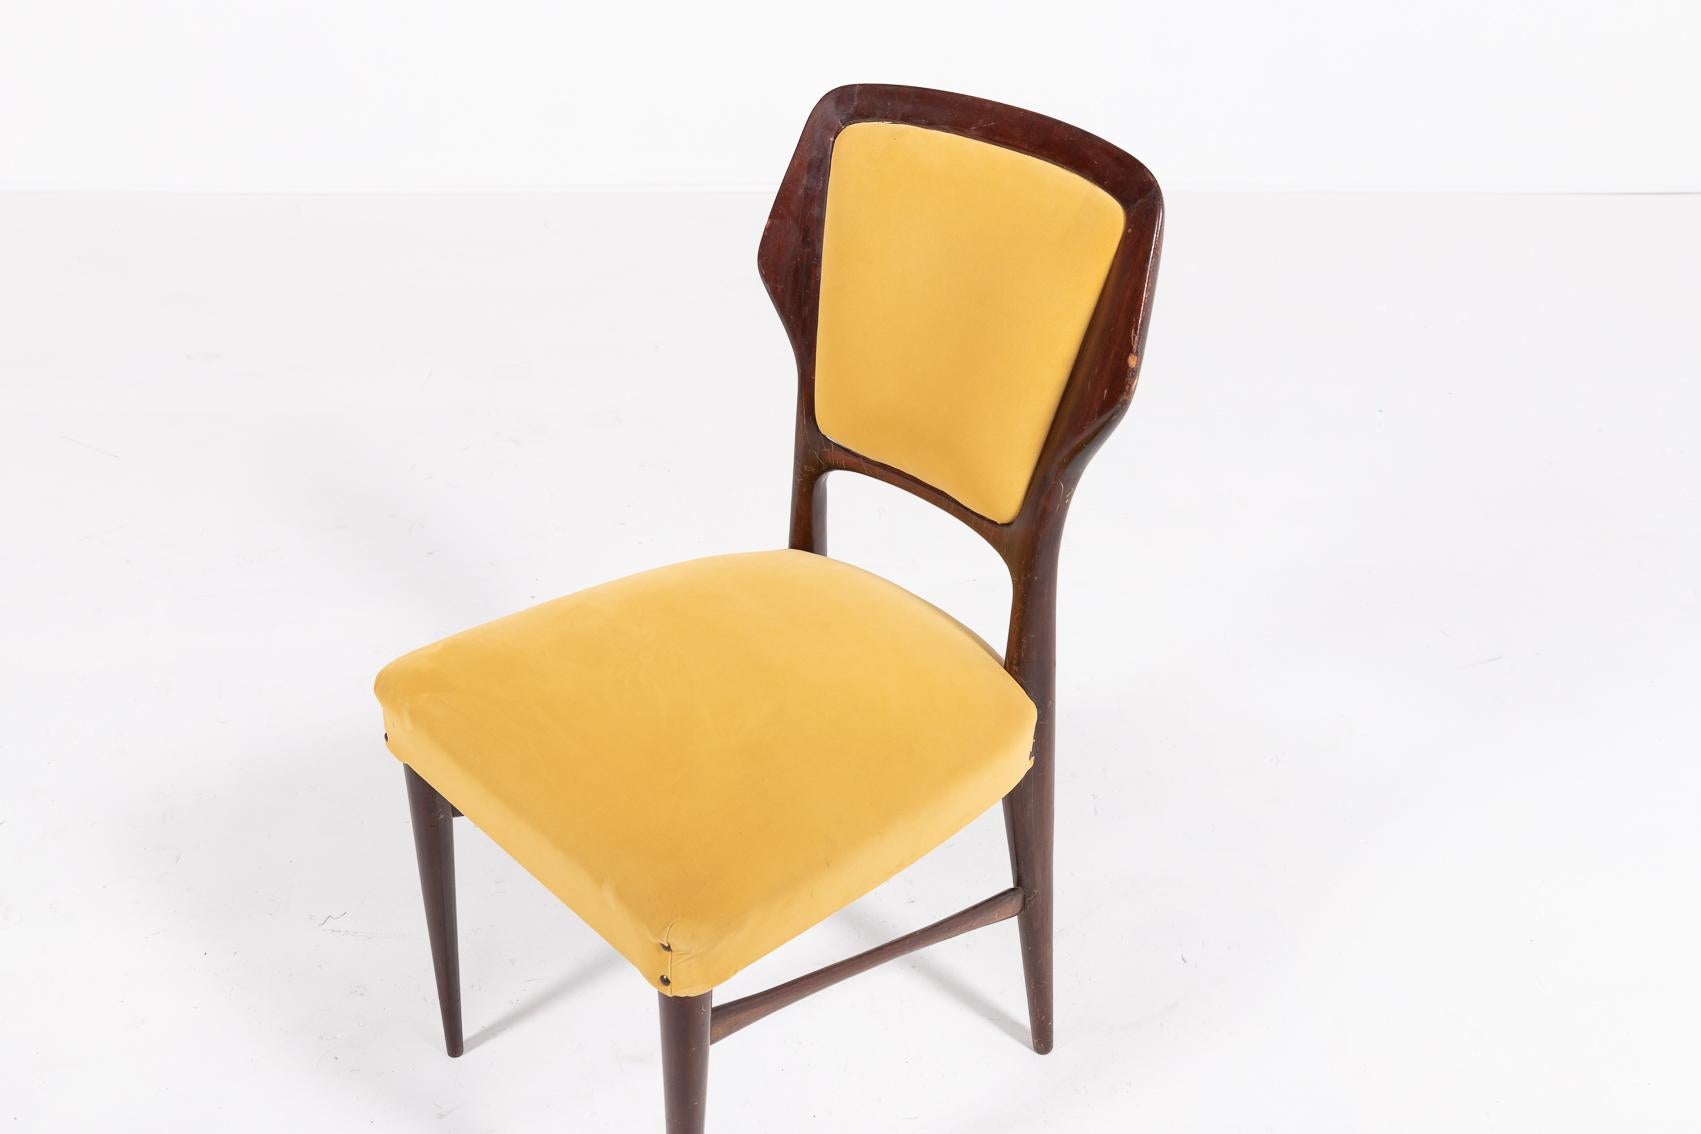 Italian Mid-Century Modern chairs from Vittorio Dassi, 1960s For Sale 2